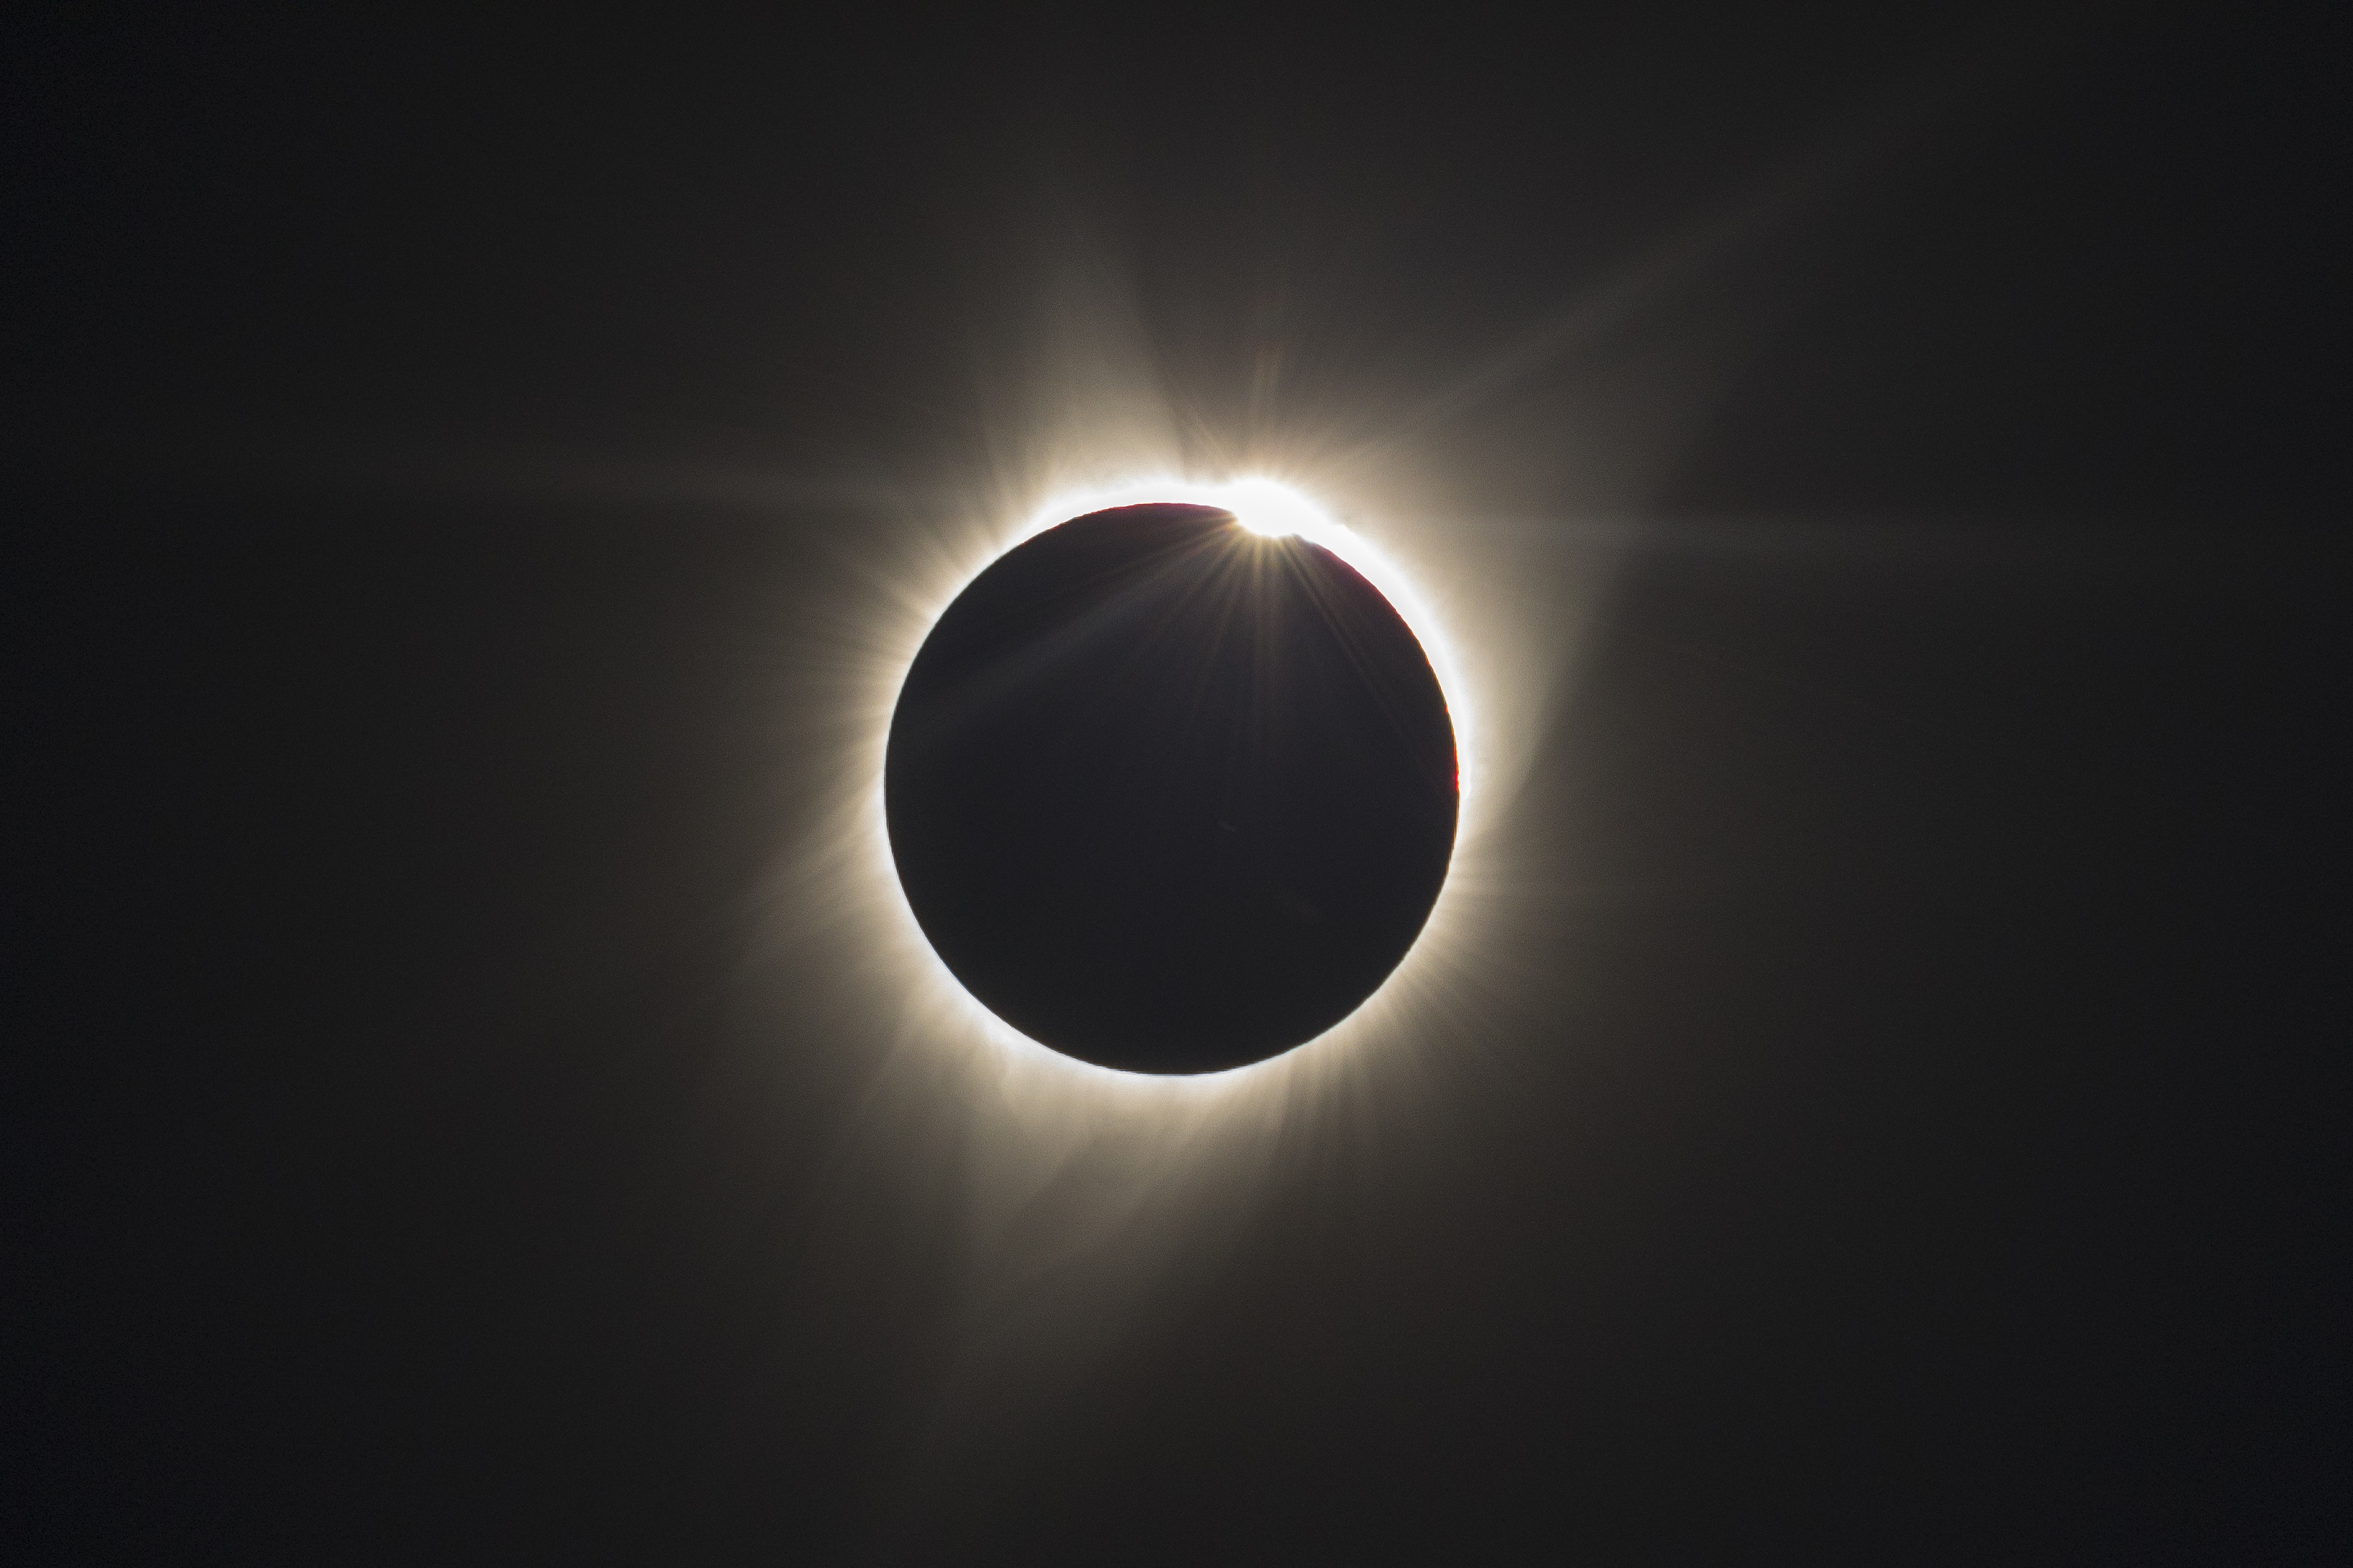 Diamond ring phase during a total eclipse